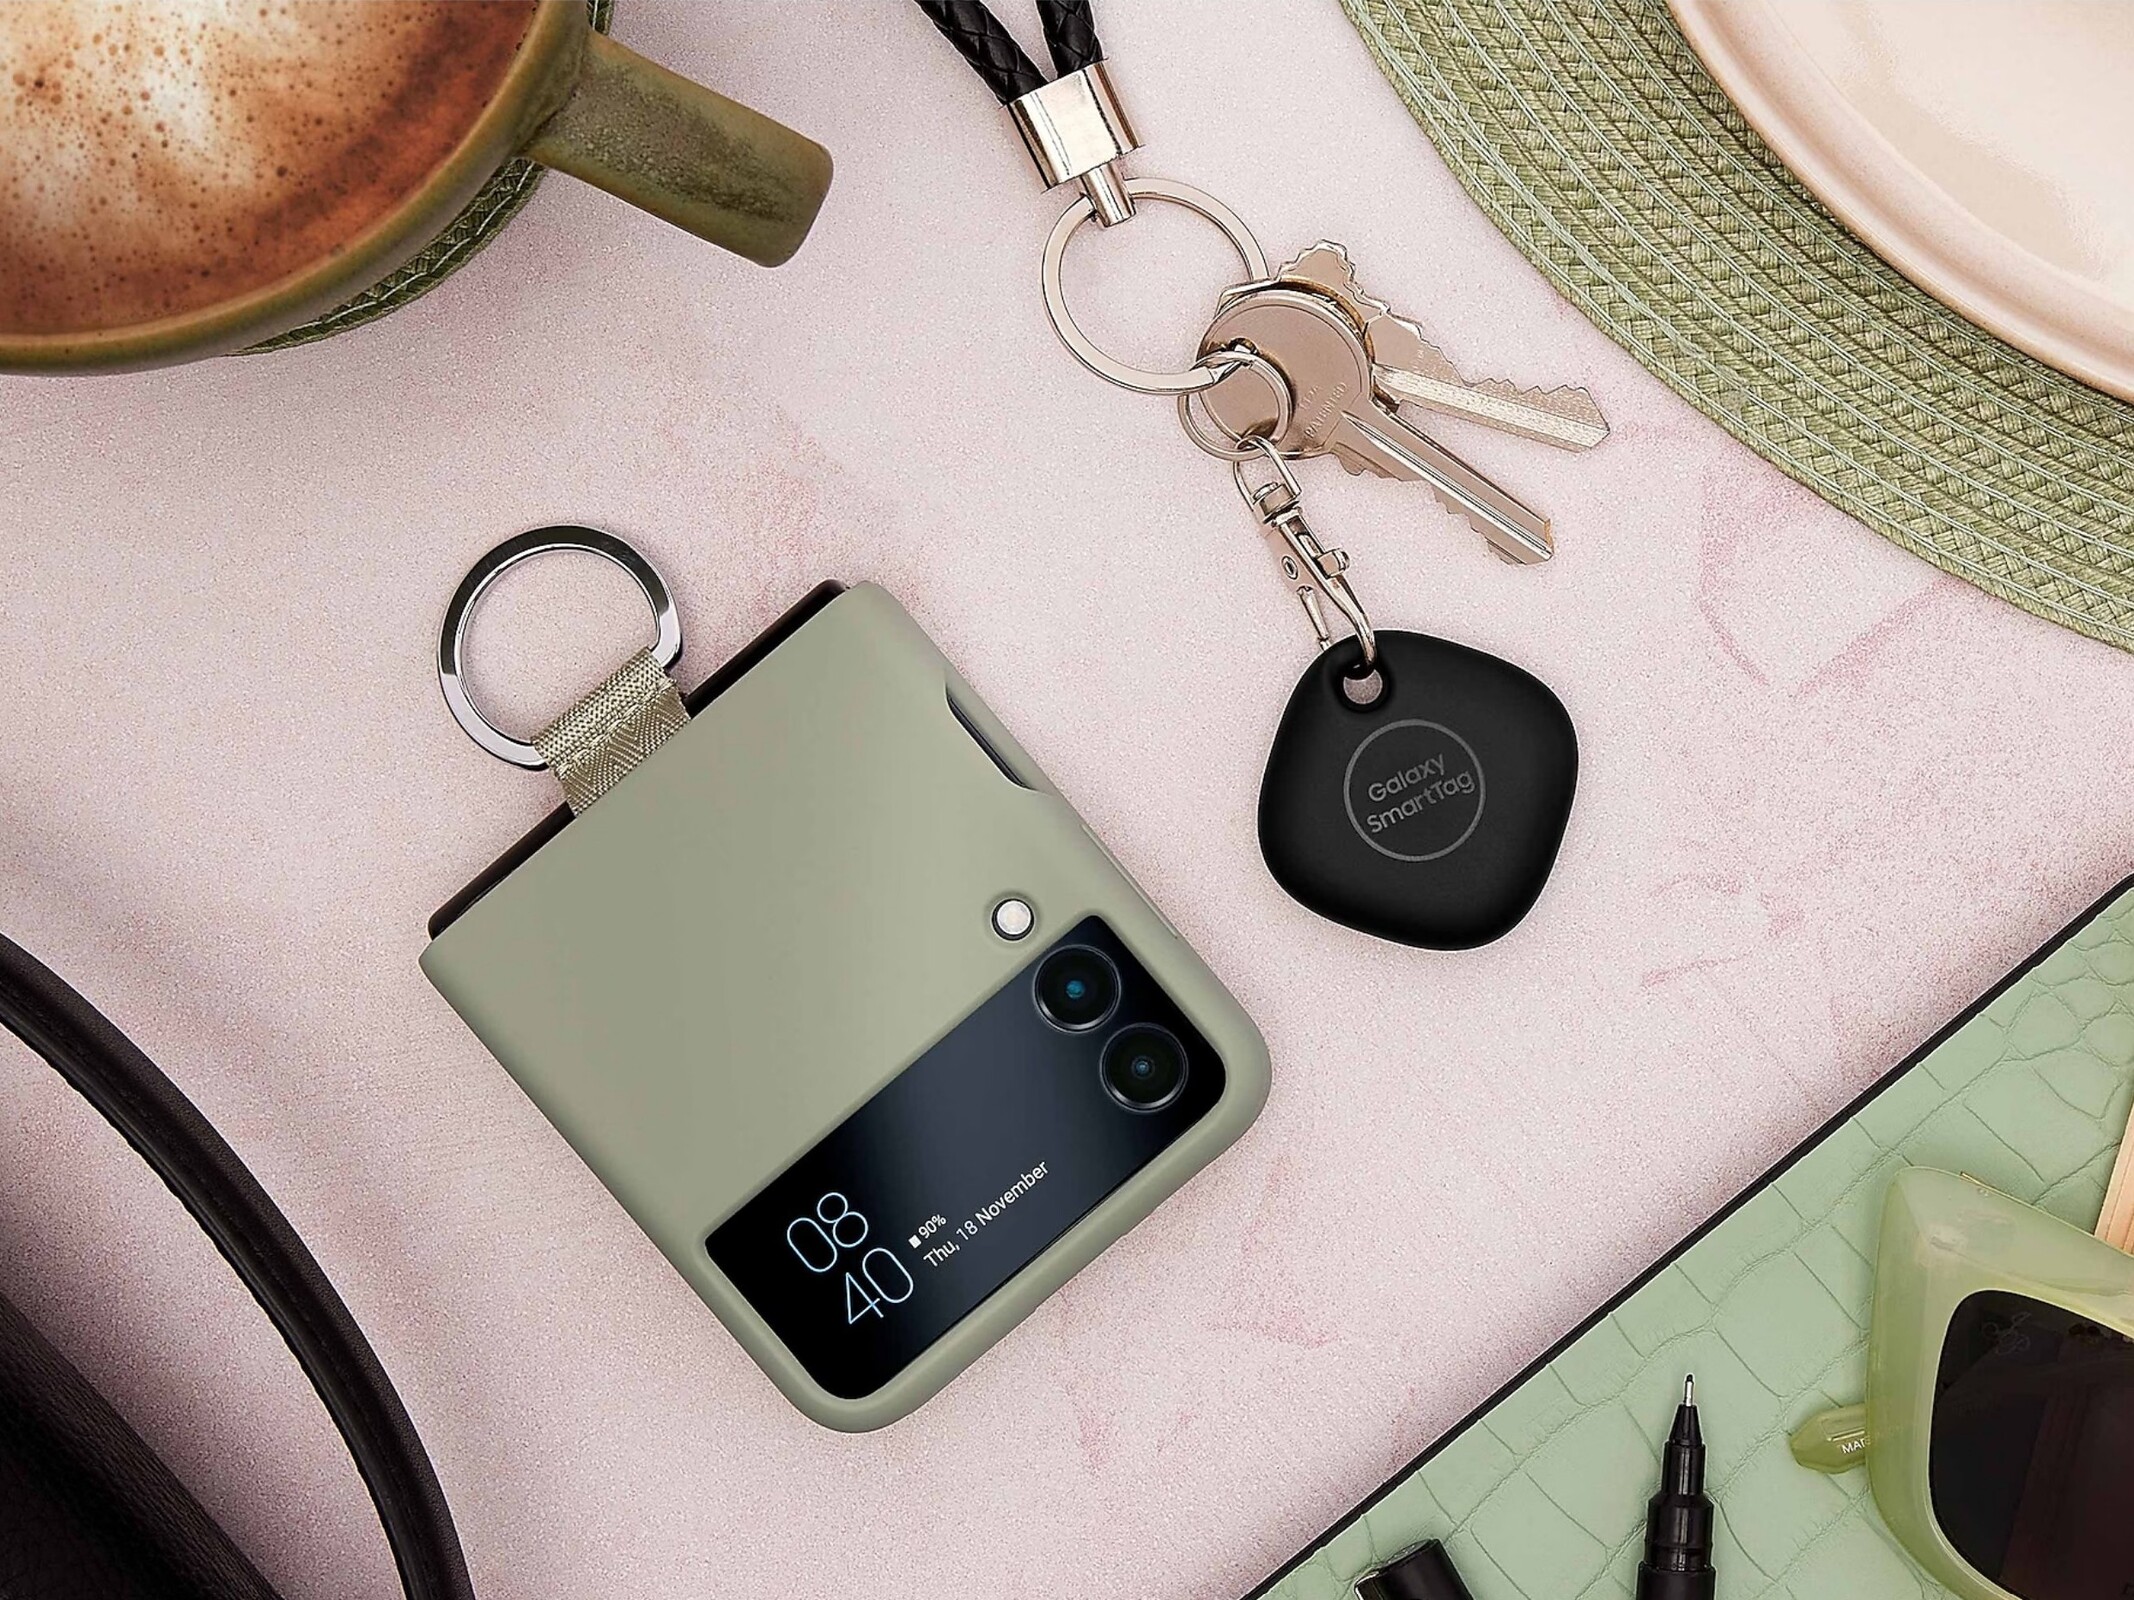 Samsung's SmartTag 2 is a sleek upgrade exclusive to Galaxy users